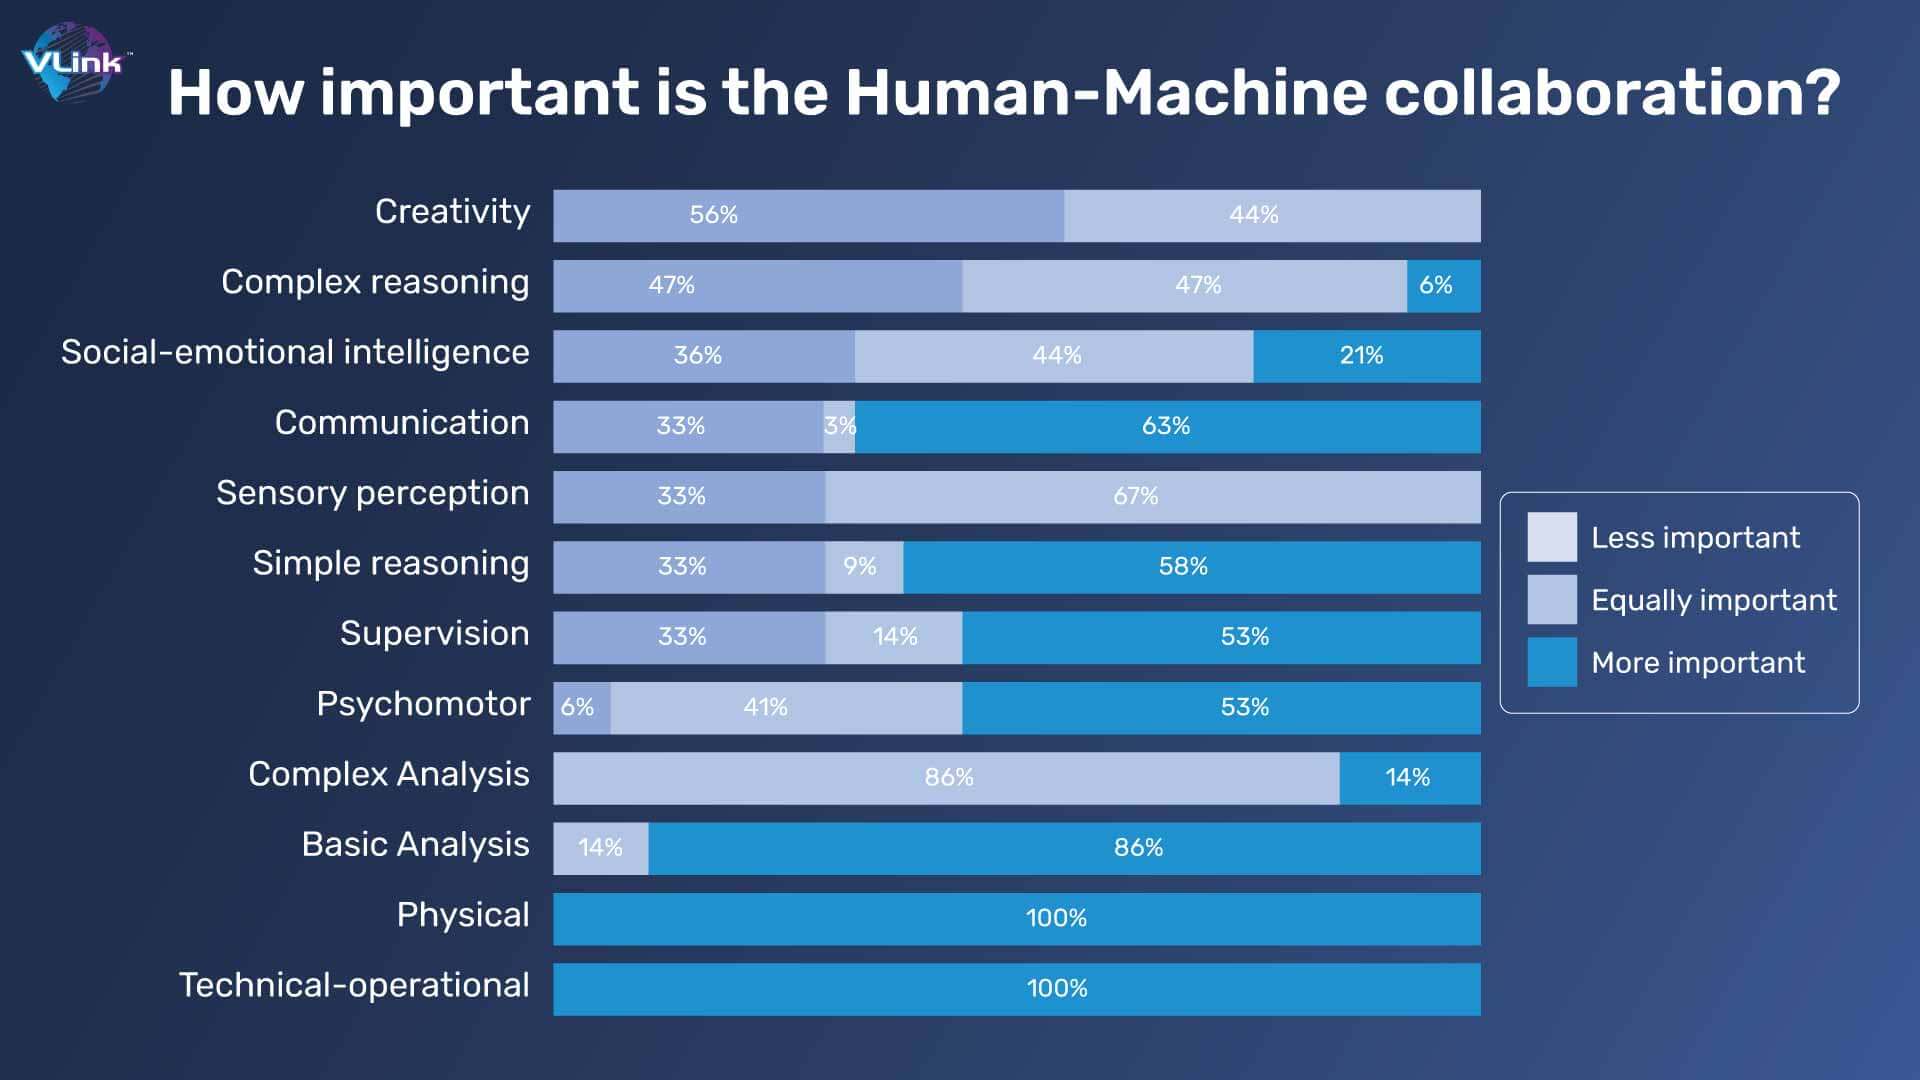 How important is the Human-Machine collaboration